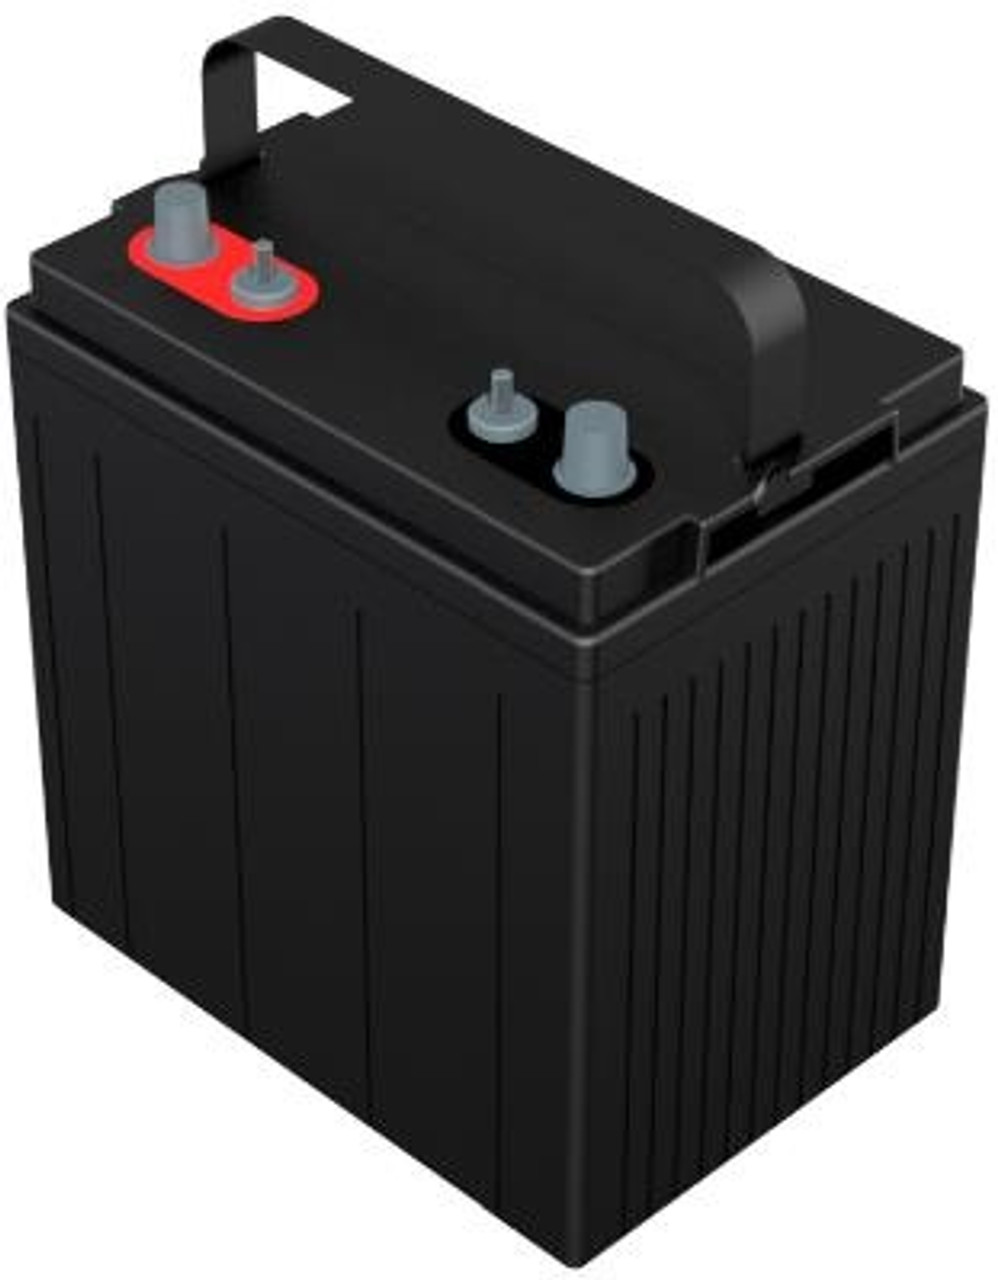 Raion Power RG-GC8-165-DT Replacement Battery for Club Car Carryall 300 Commercial Utility 4X2